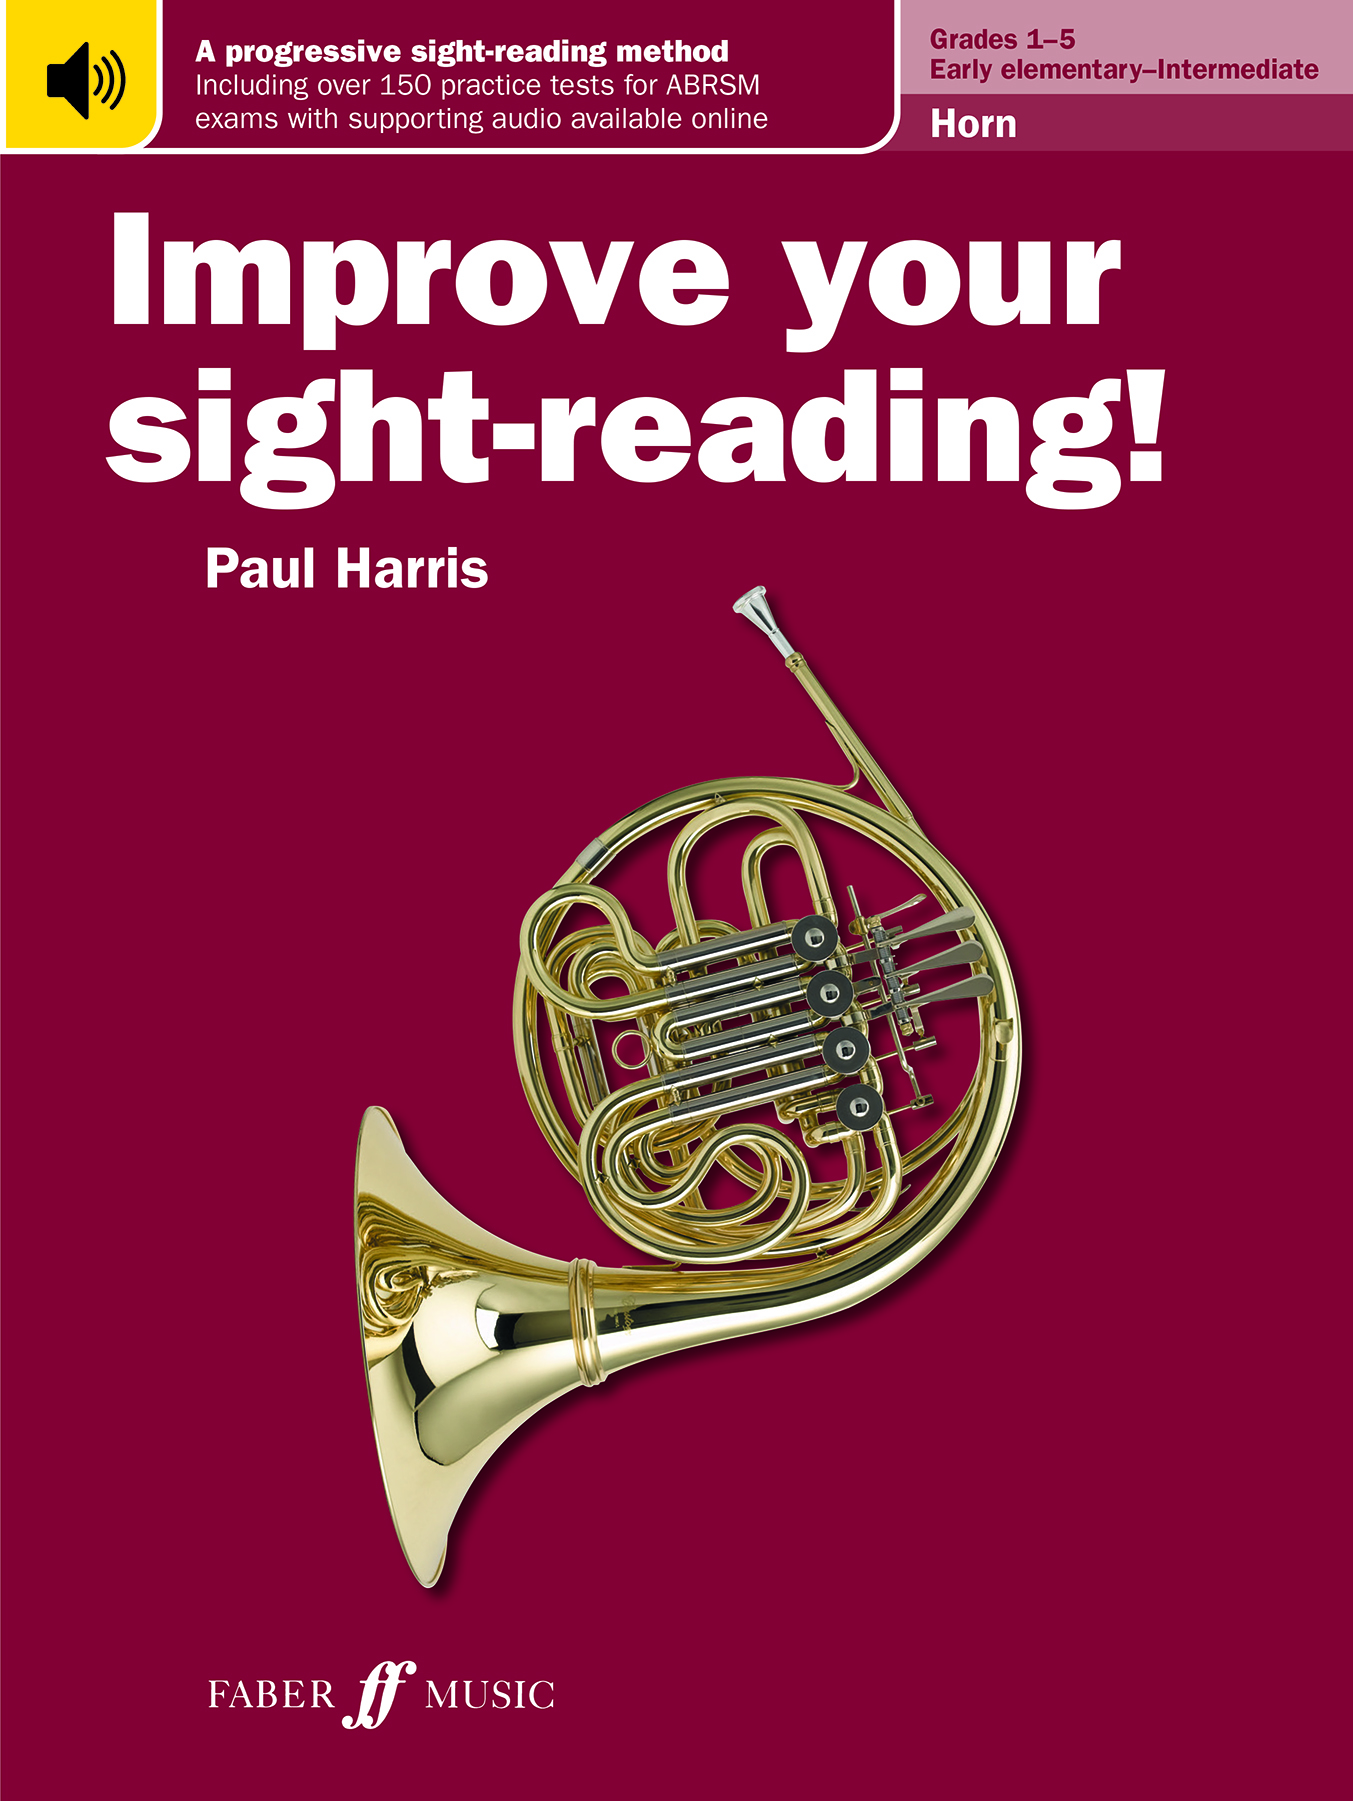 Improve Your Sight-reading Horn Grades 1-5 Sheet Music Songbook